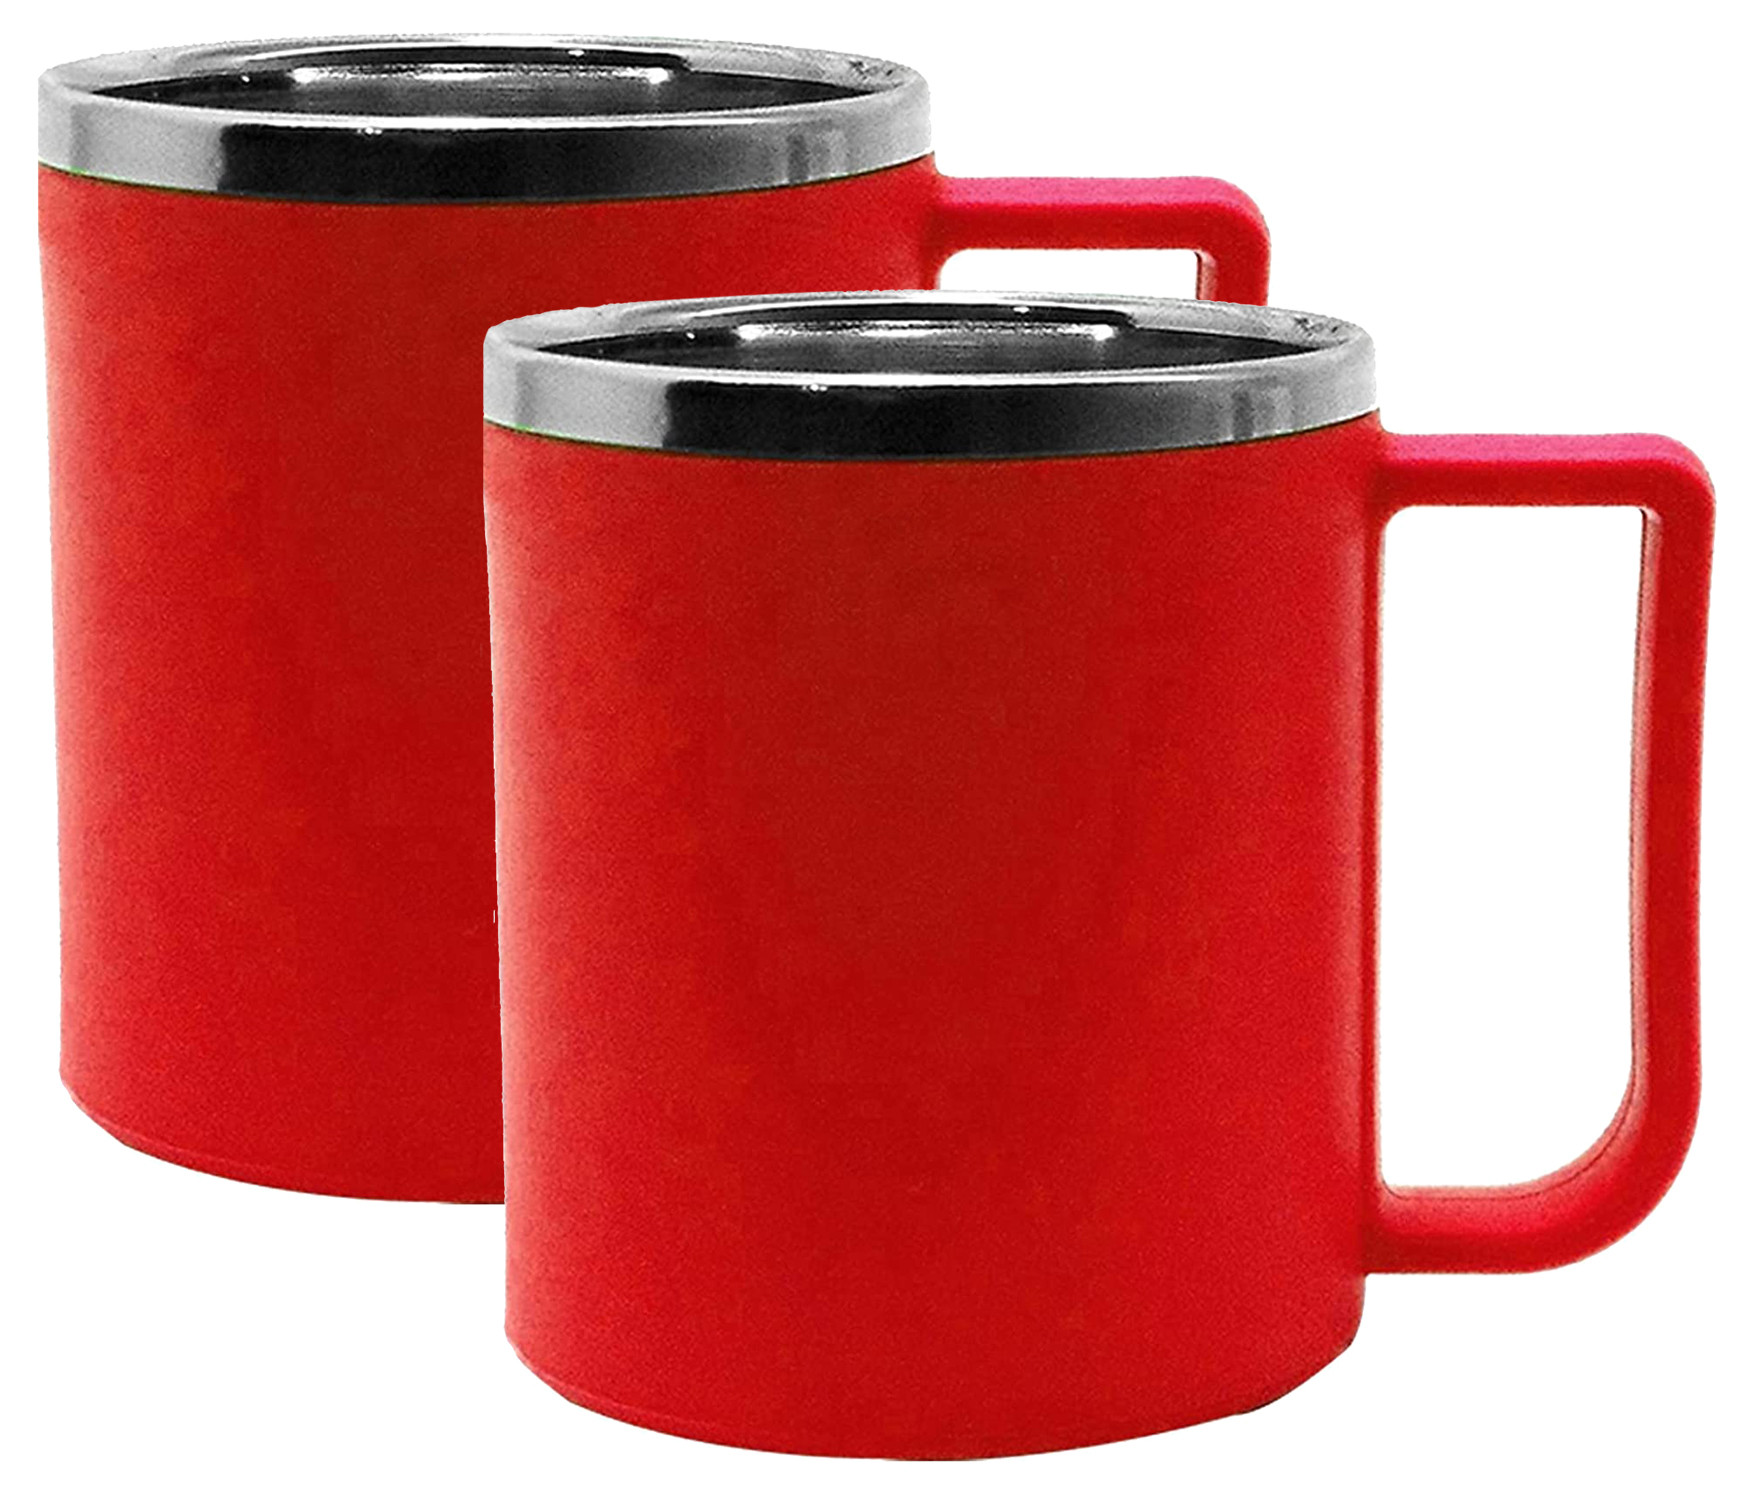 Kuber Industries Medium Size Plastic Steel Cups for Coffee Tea Cocoa, Camping Mugs with Handle, Portable & Easy Clean,(Red)